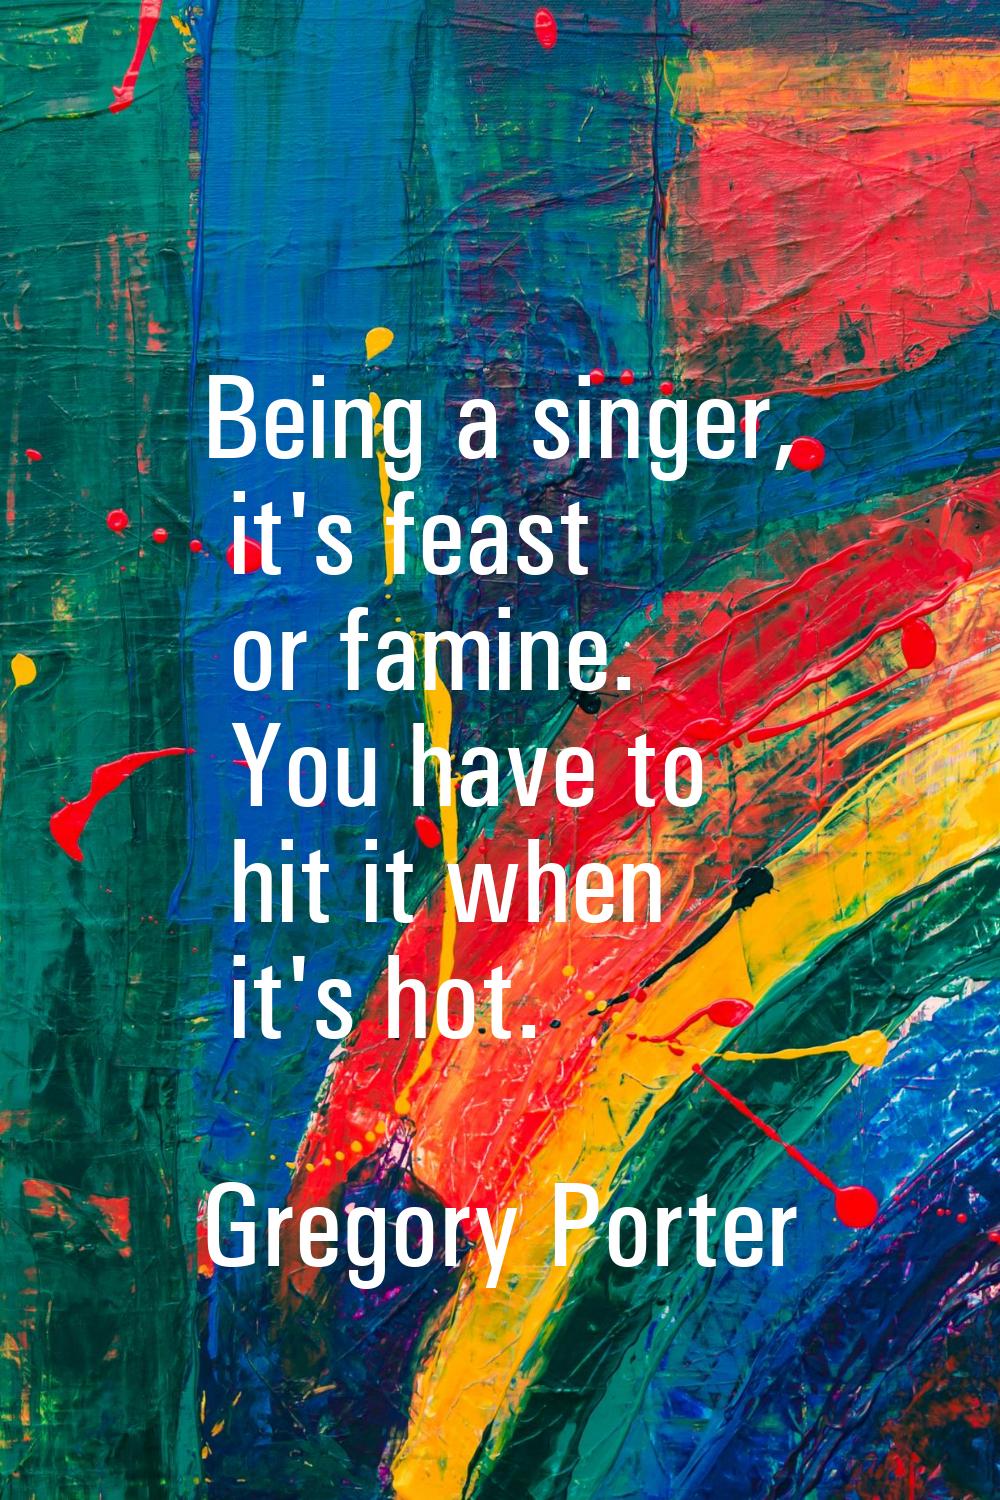 Being a singer, it's feast or famine. You have to hit it when it's hot.